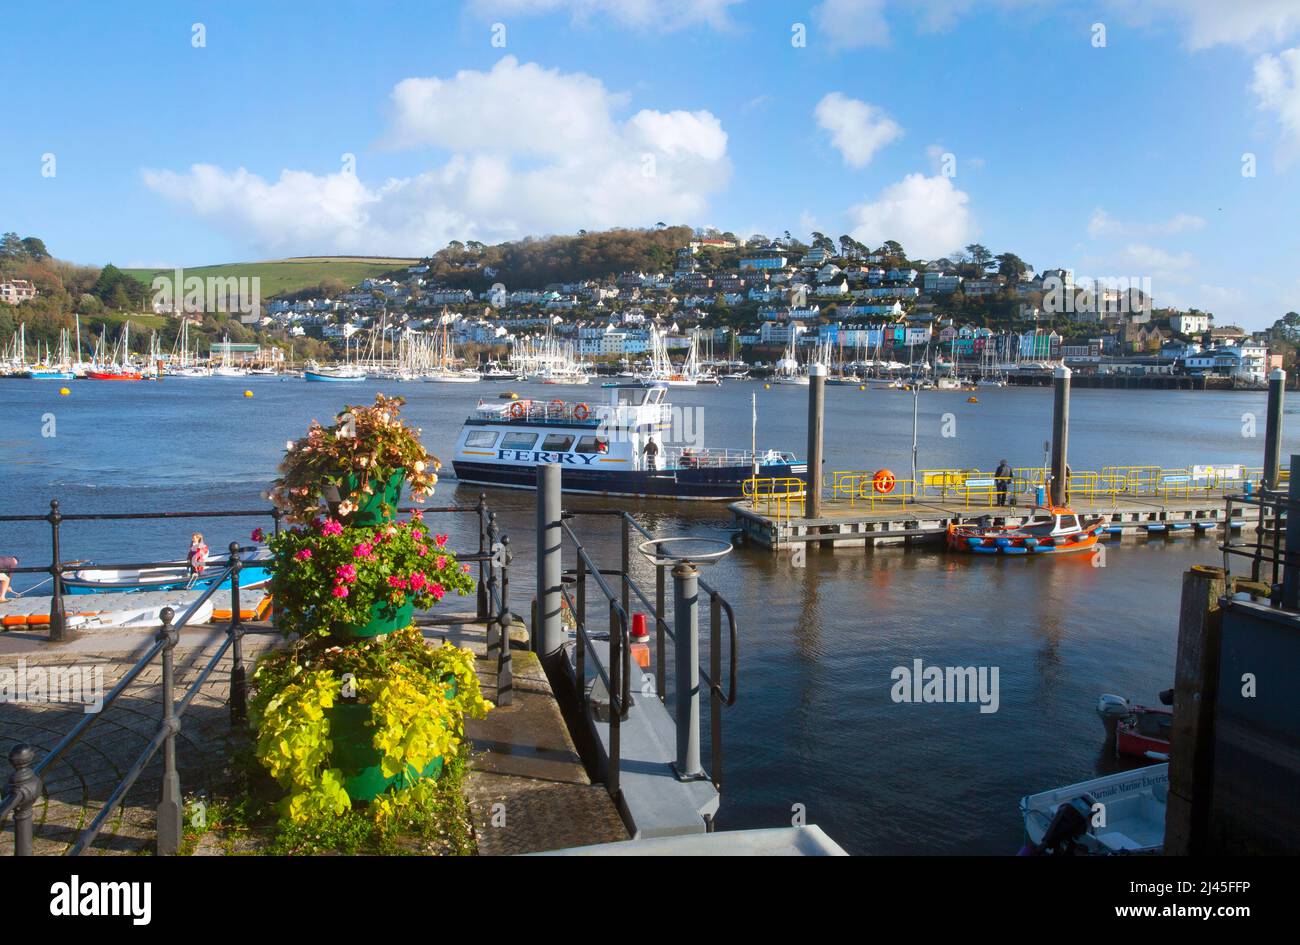 Passenger ferry approaching landing river Dart Dartmouth England UK copy space summer blue sky yachts & Kingswear houses in distance from Dartmouth Stock Photo